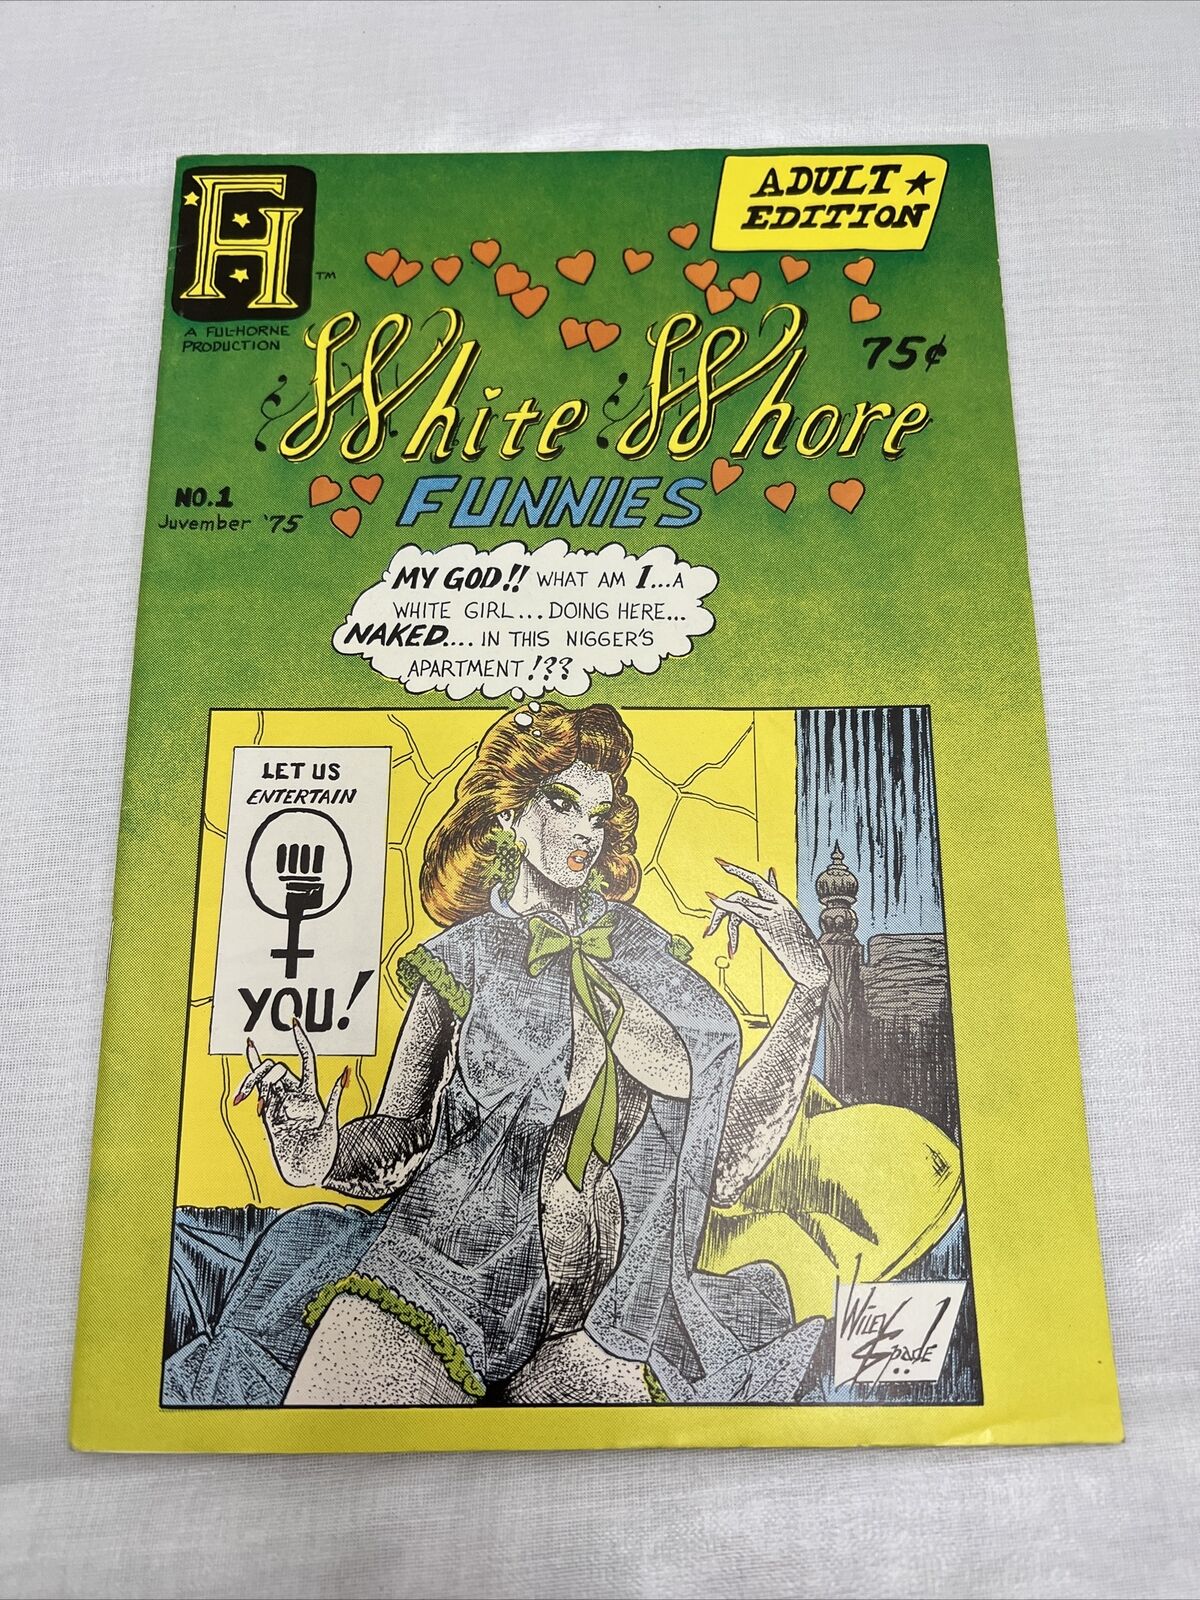 White Whore Funnies Vol 1 No 1 Oct 1975 Ful-Horne Production